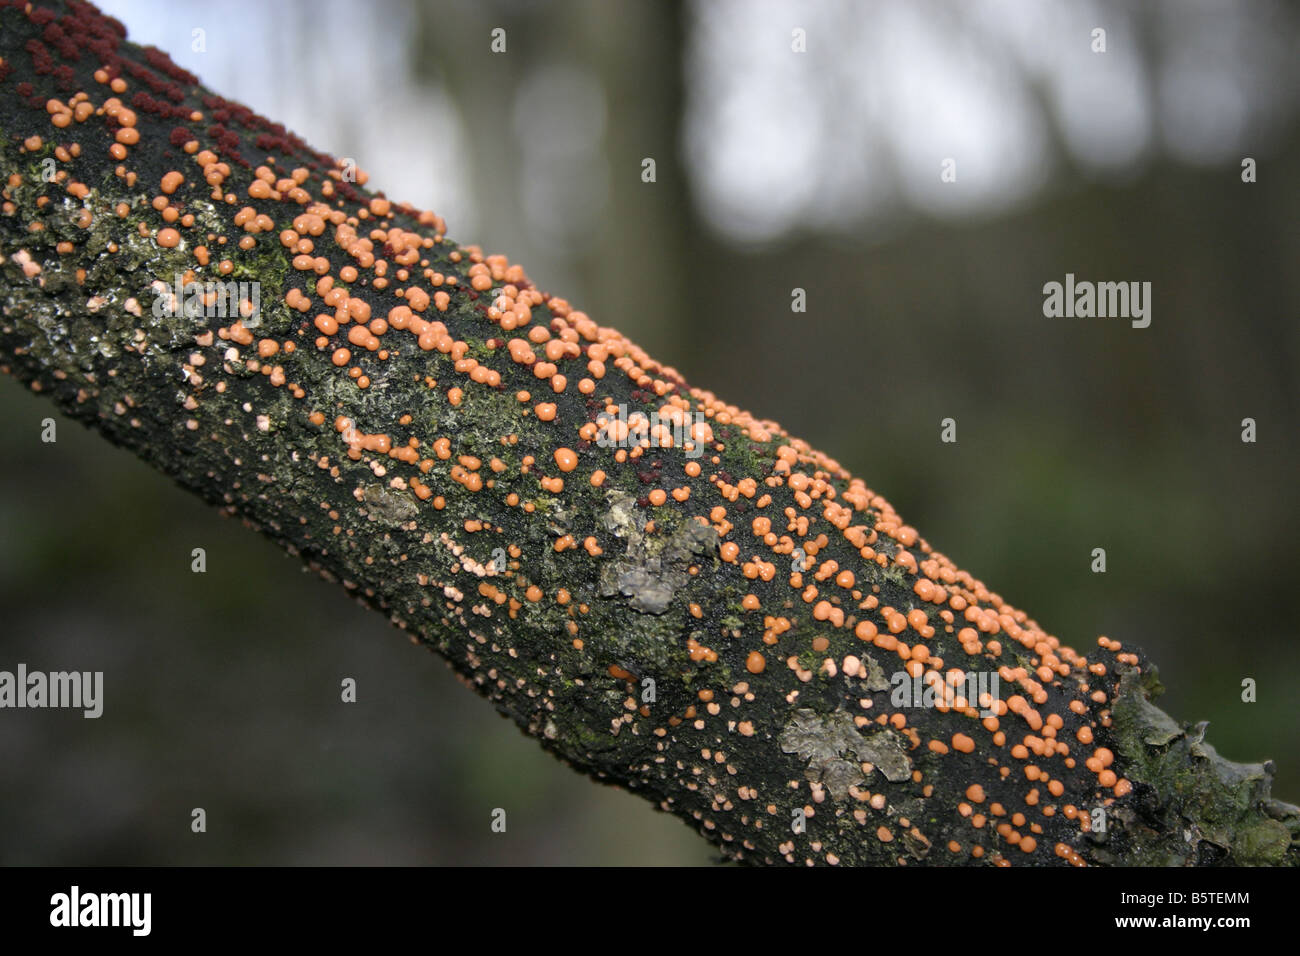 Coral spot Nectria cinnabarina growing on a branch Stock Photo